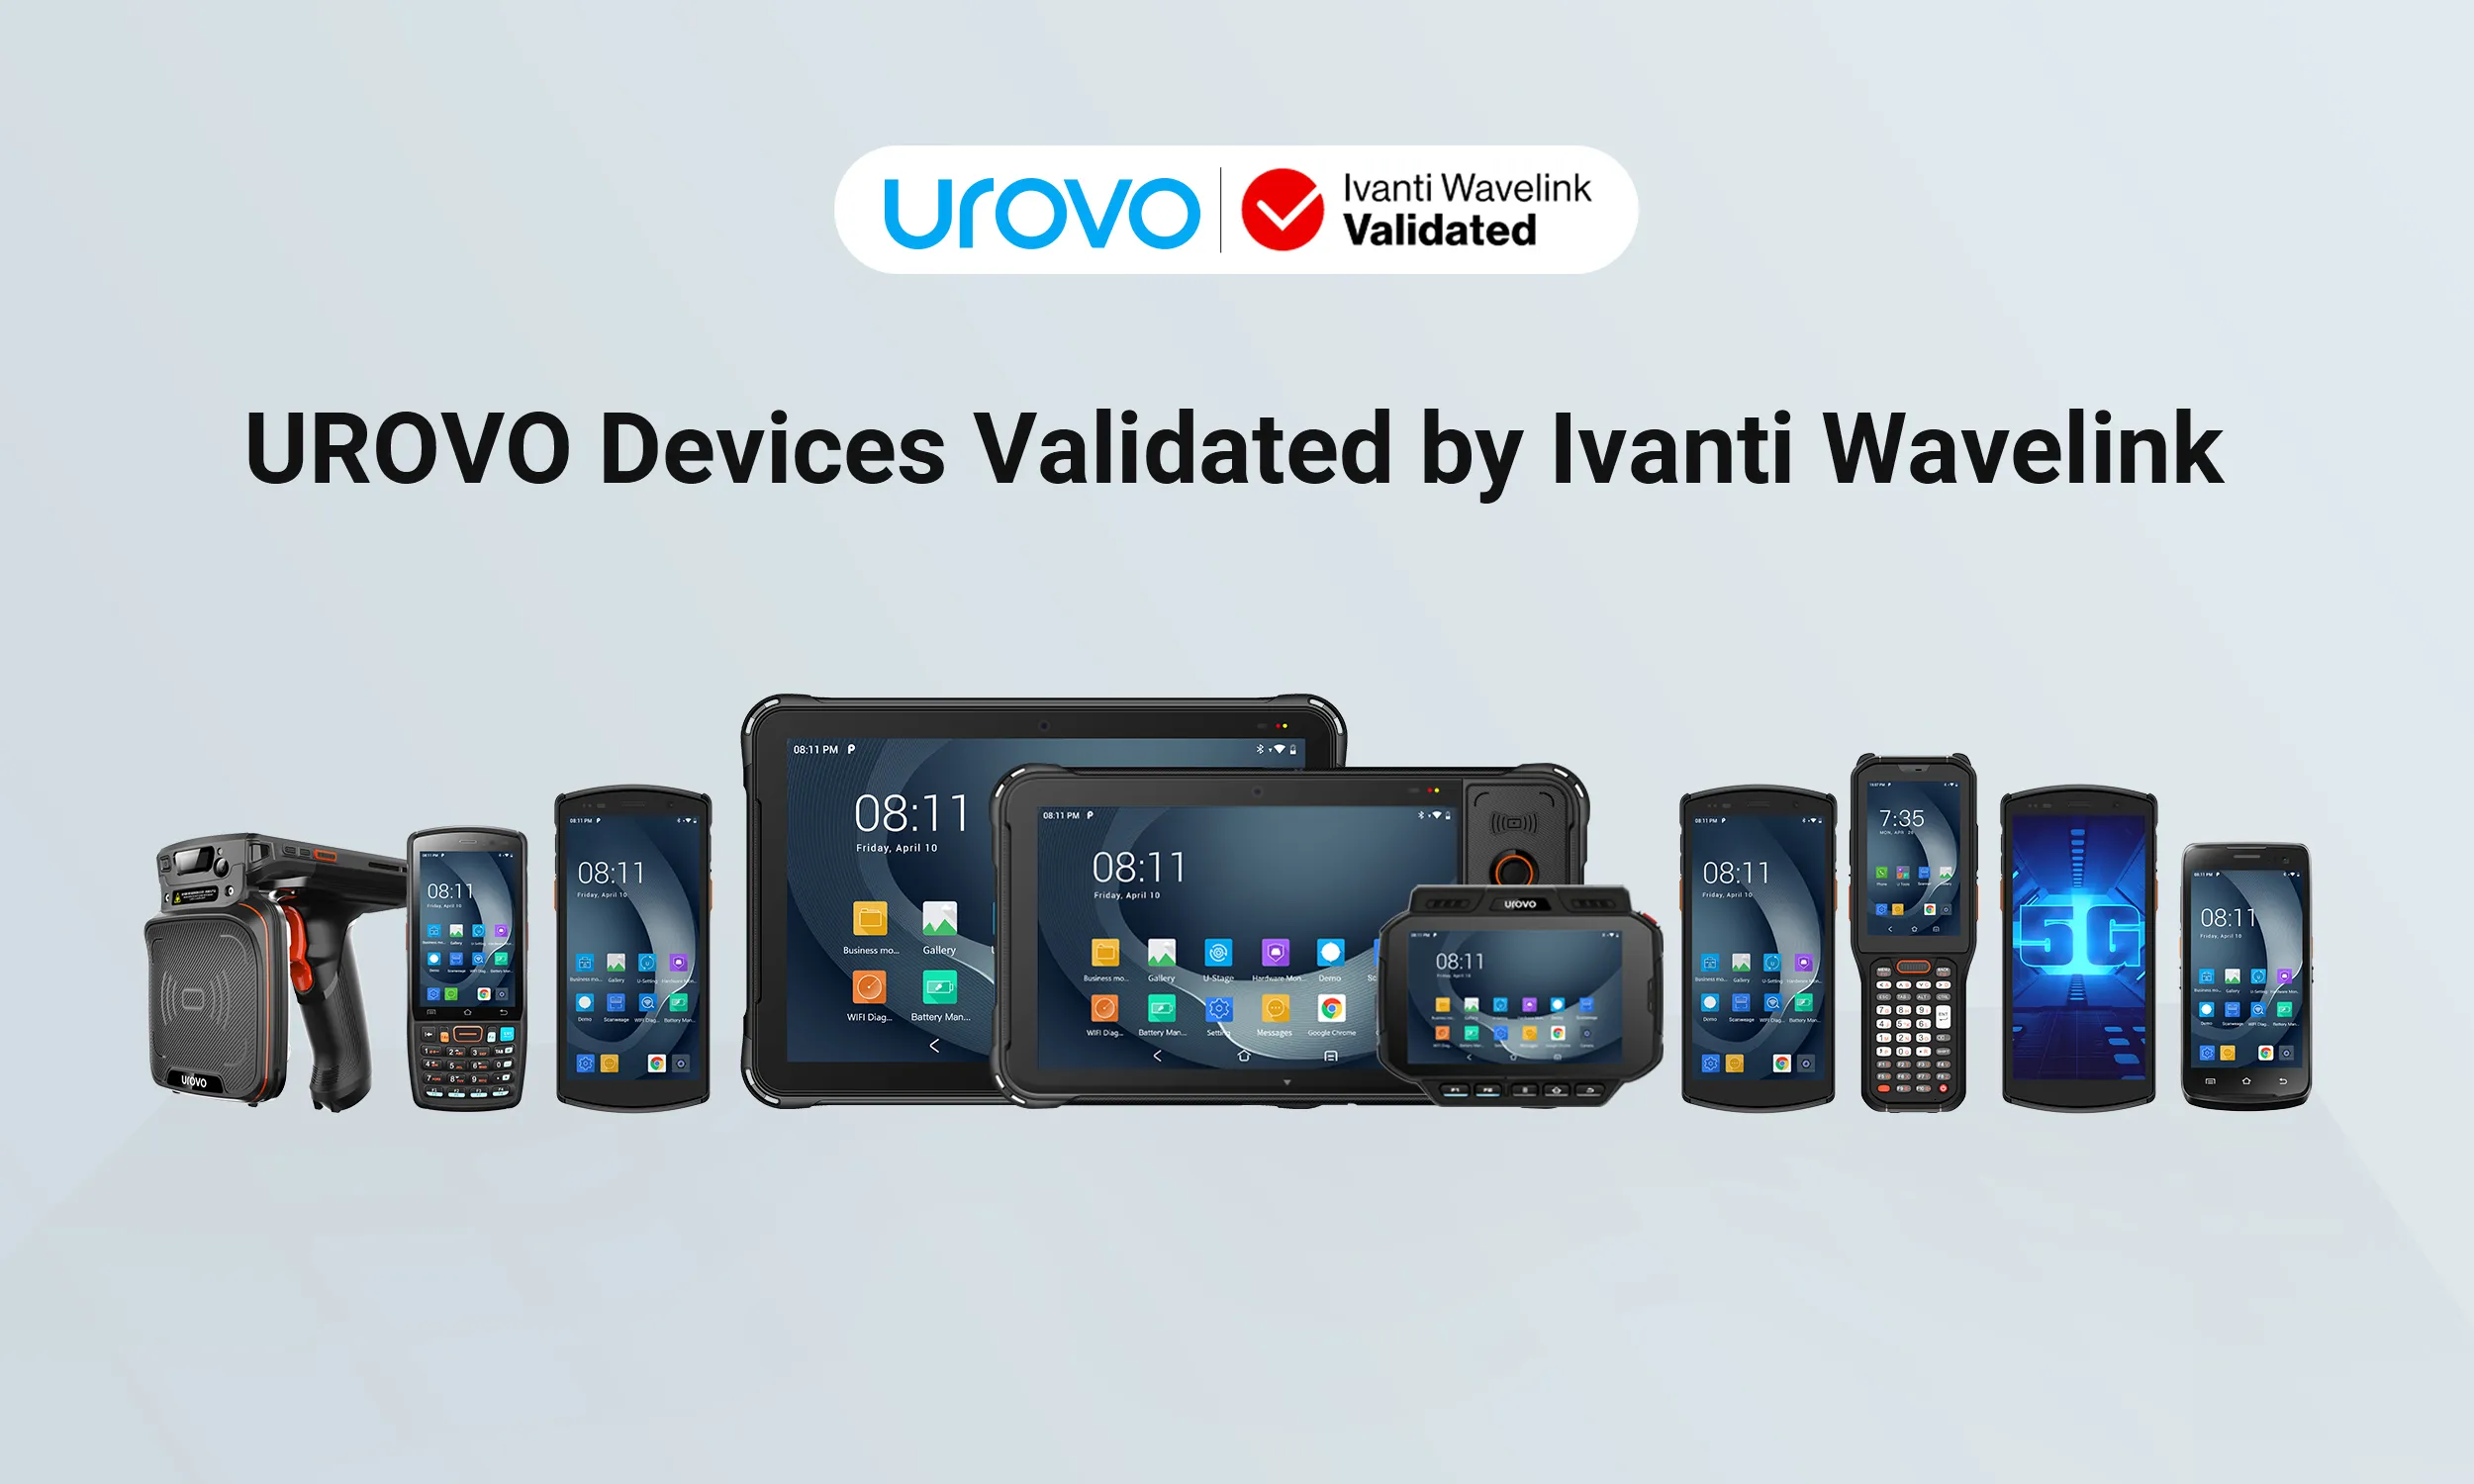 UROVO Devices are Ivanti Wavelink Certified